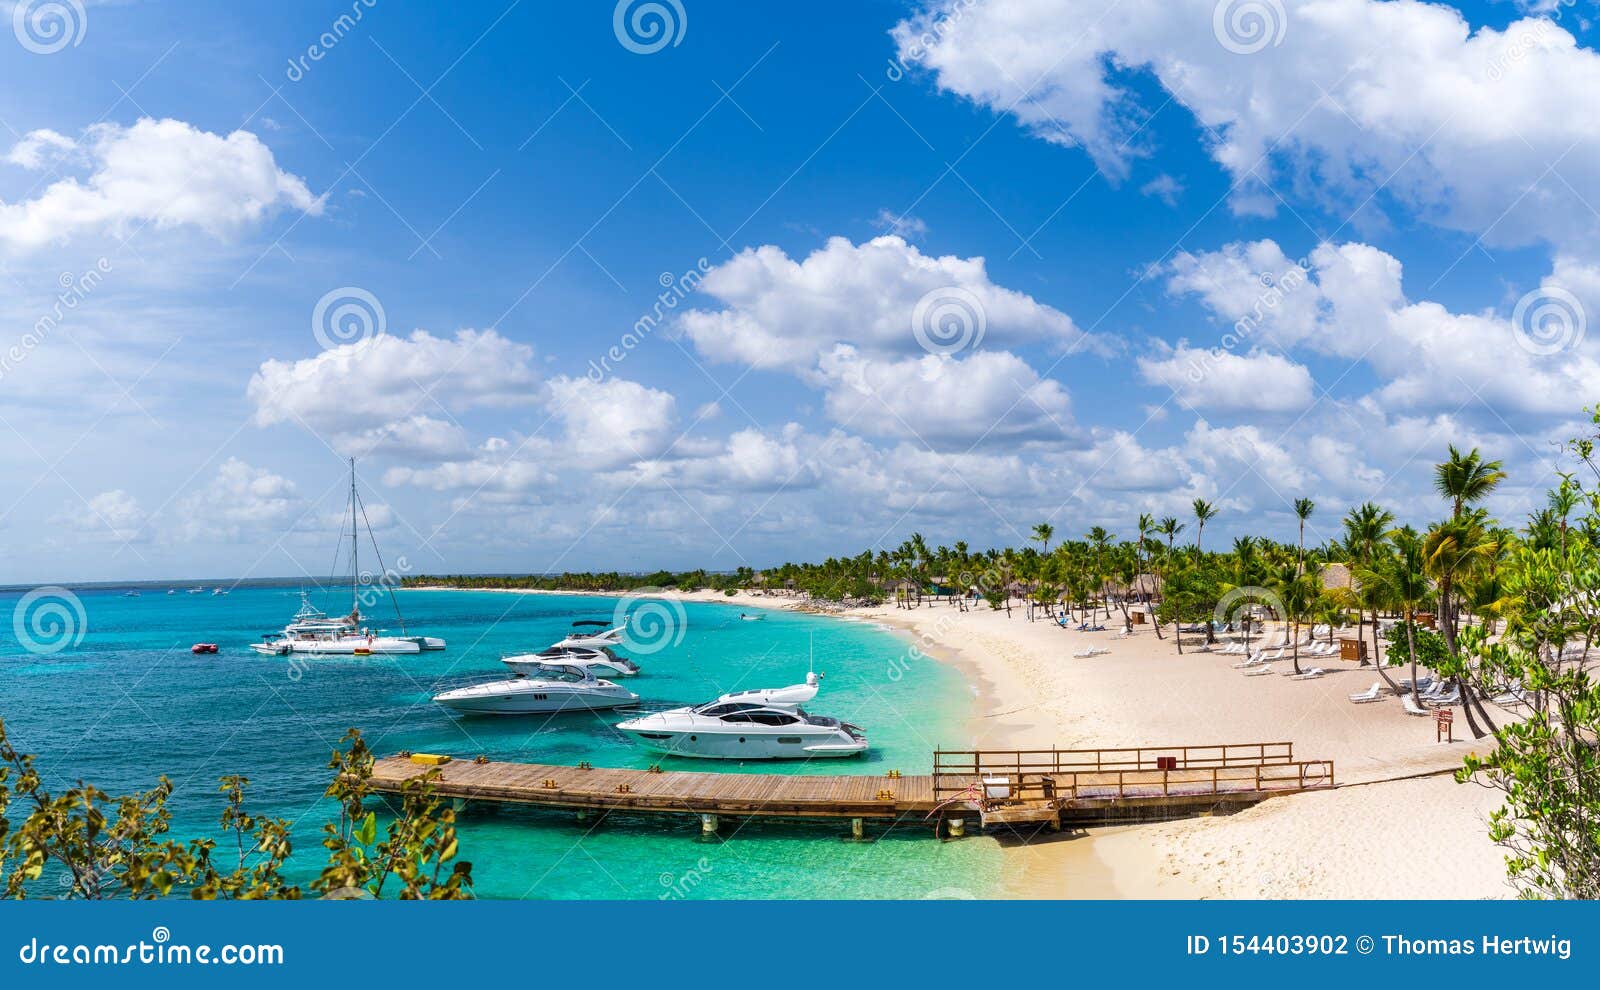 panorama view of harbor at catalina island in dominican republic